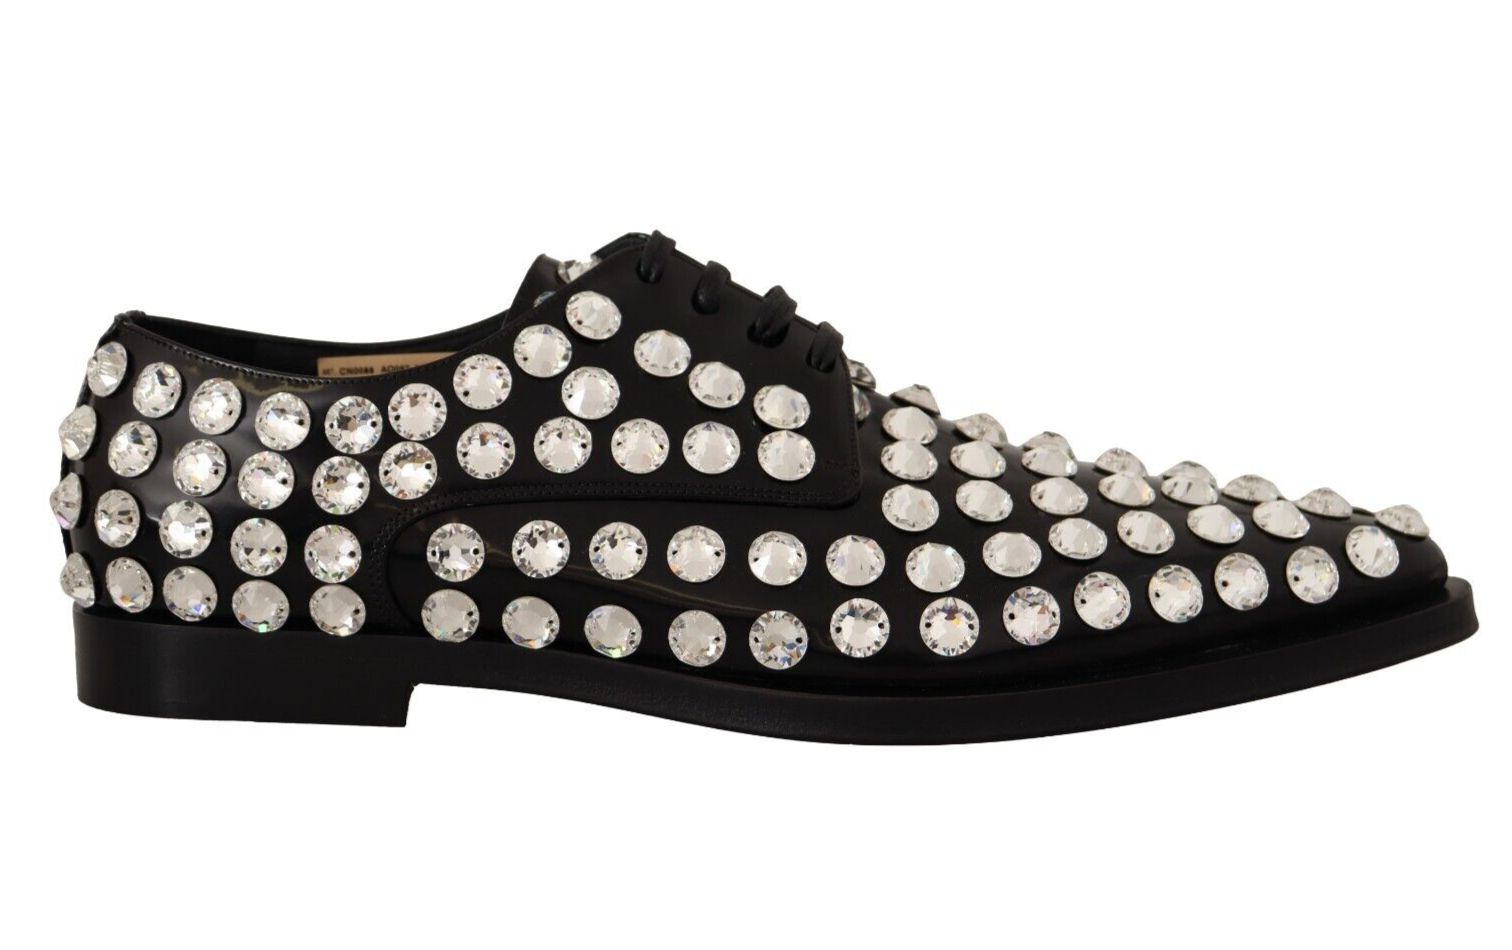 Black Dolce & Gabbana Black Leather Crystals Lace Up Formal Shoes